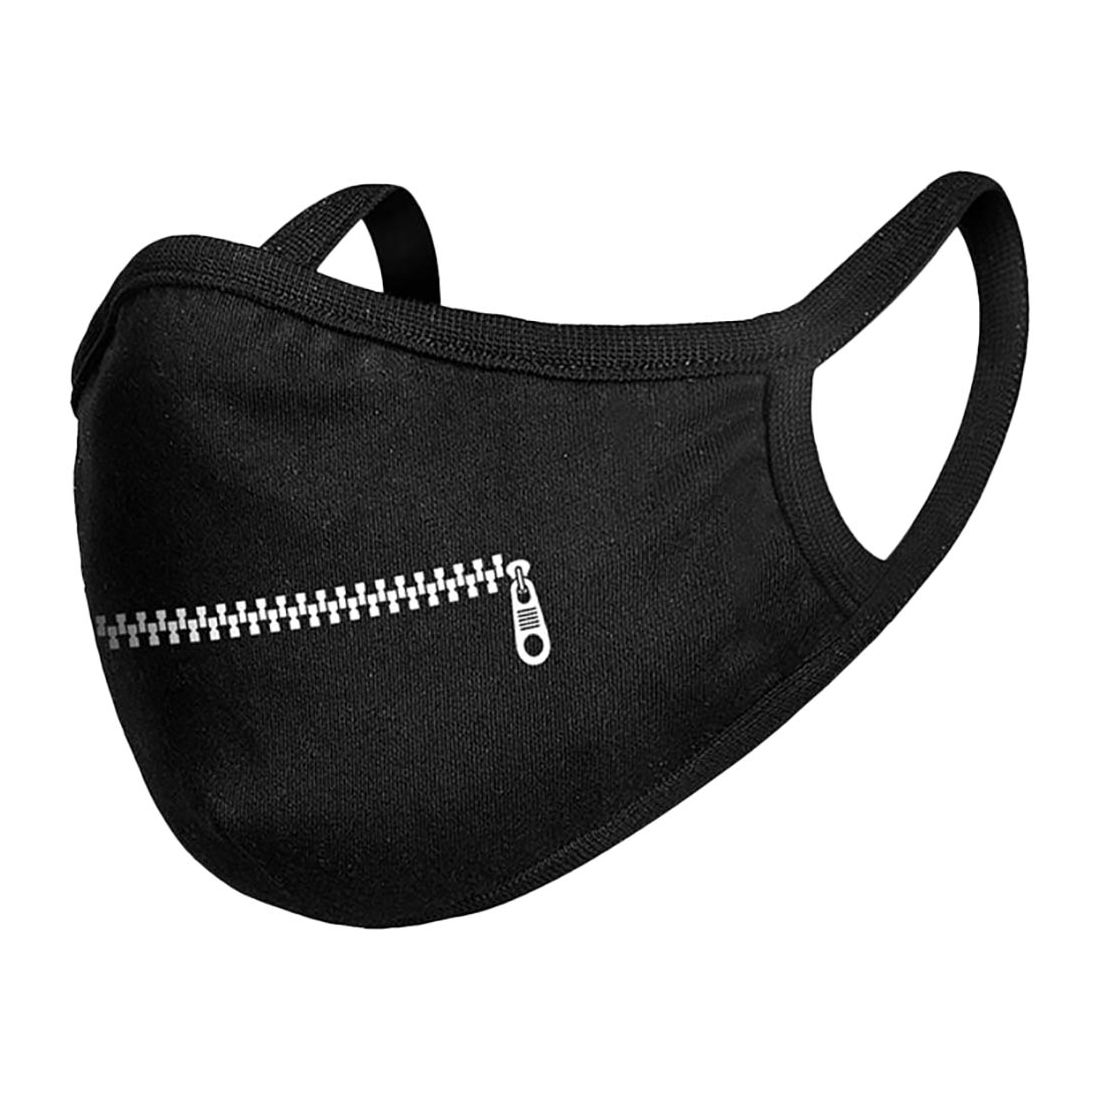 Mister Tee Youth Zipper Face Mask - Black